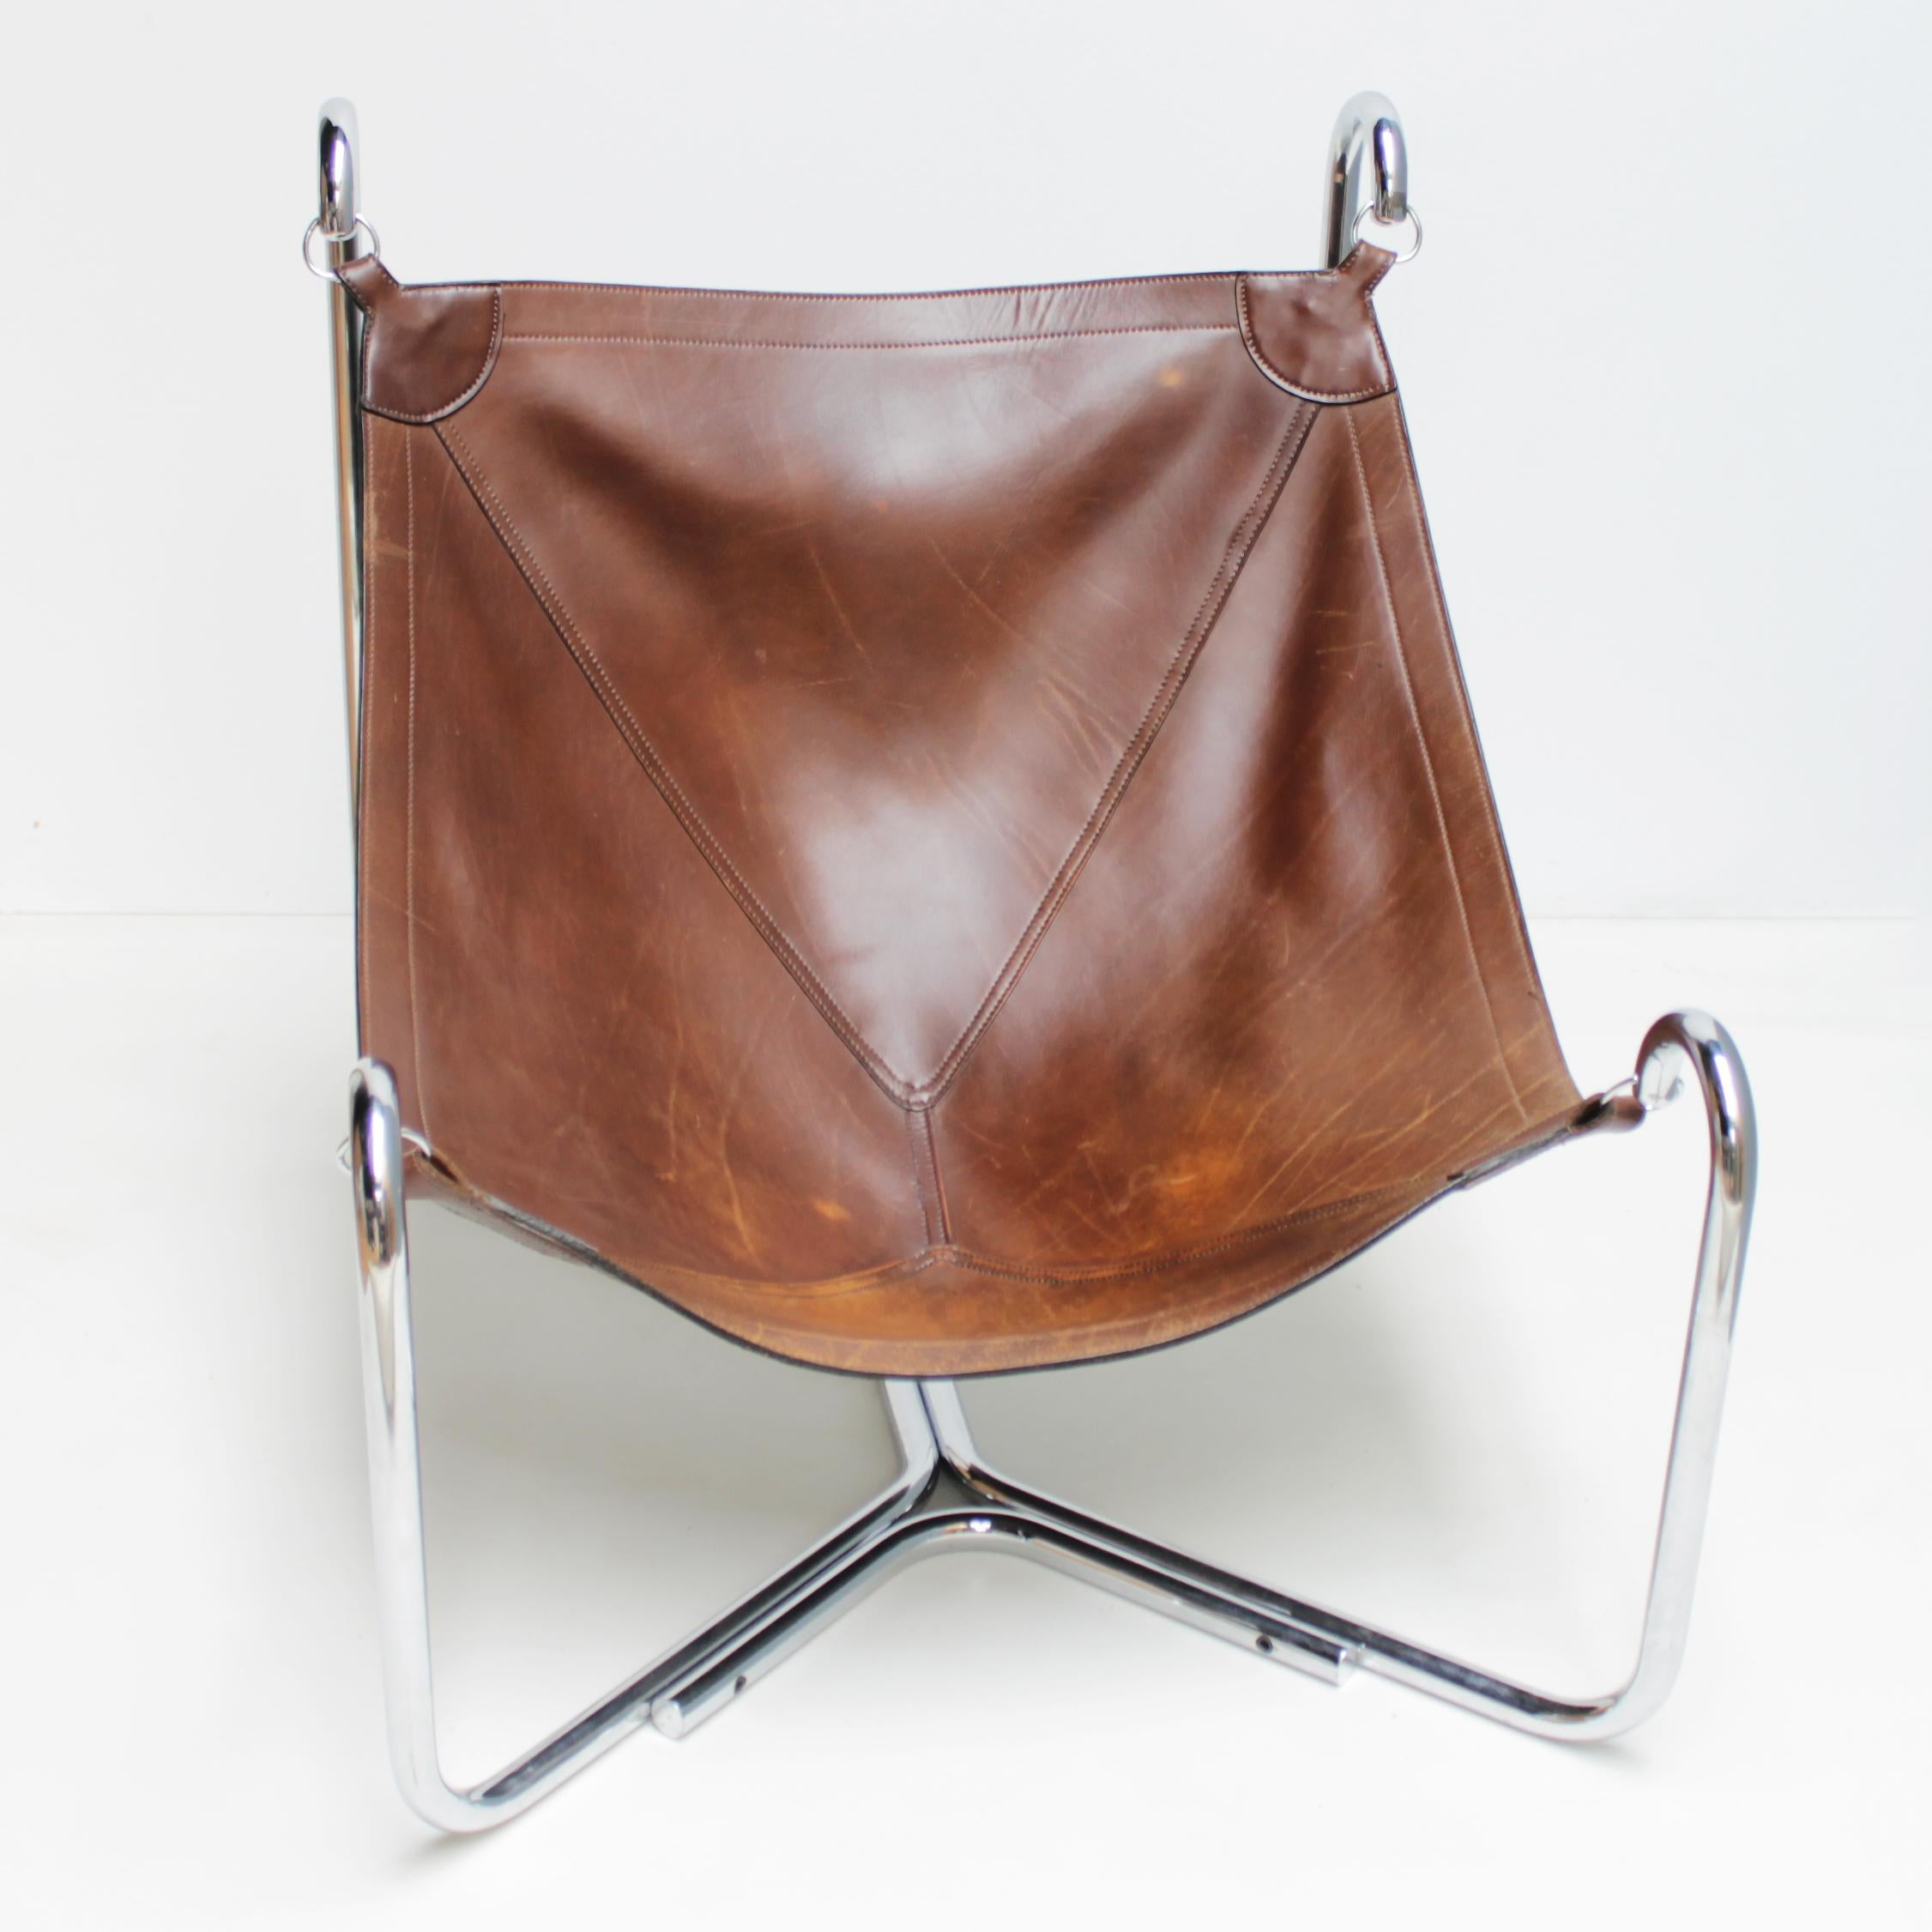 Mid-20th Century Baffo Lounge Chair by Didone and Pareschi for Busnelli